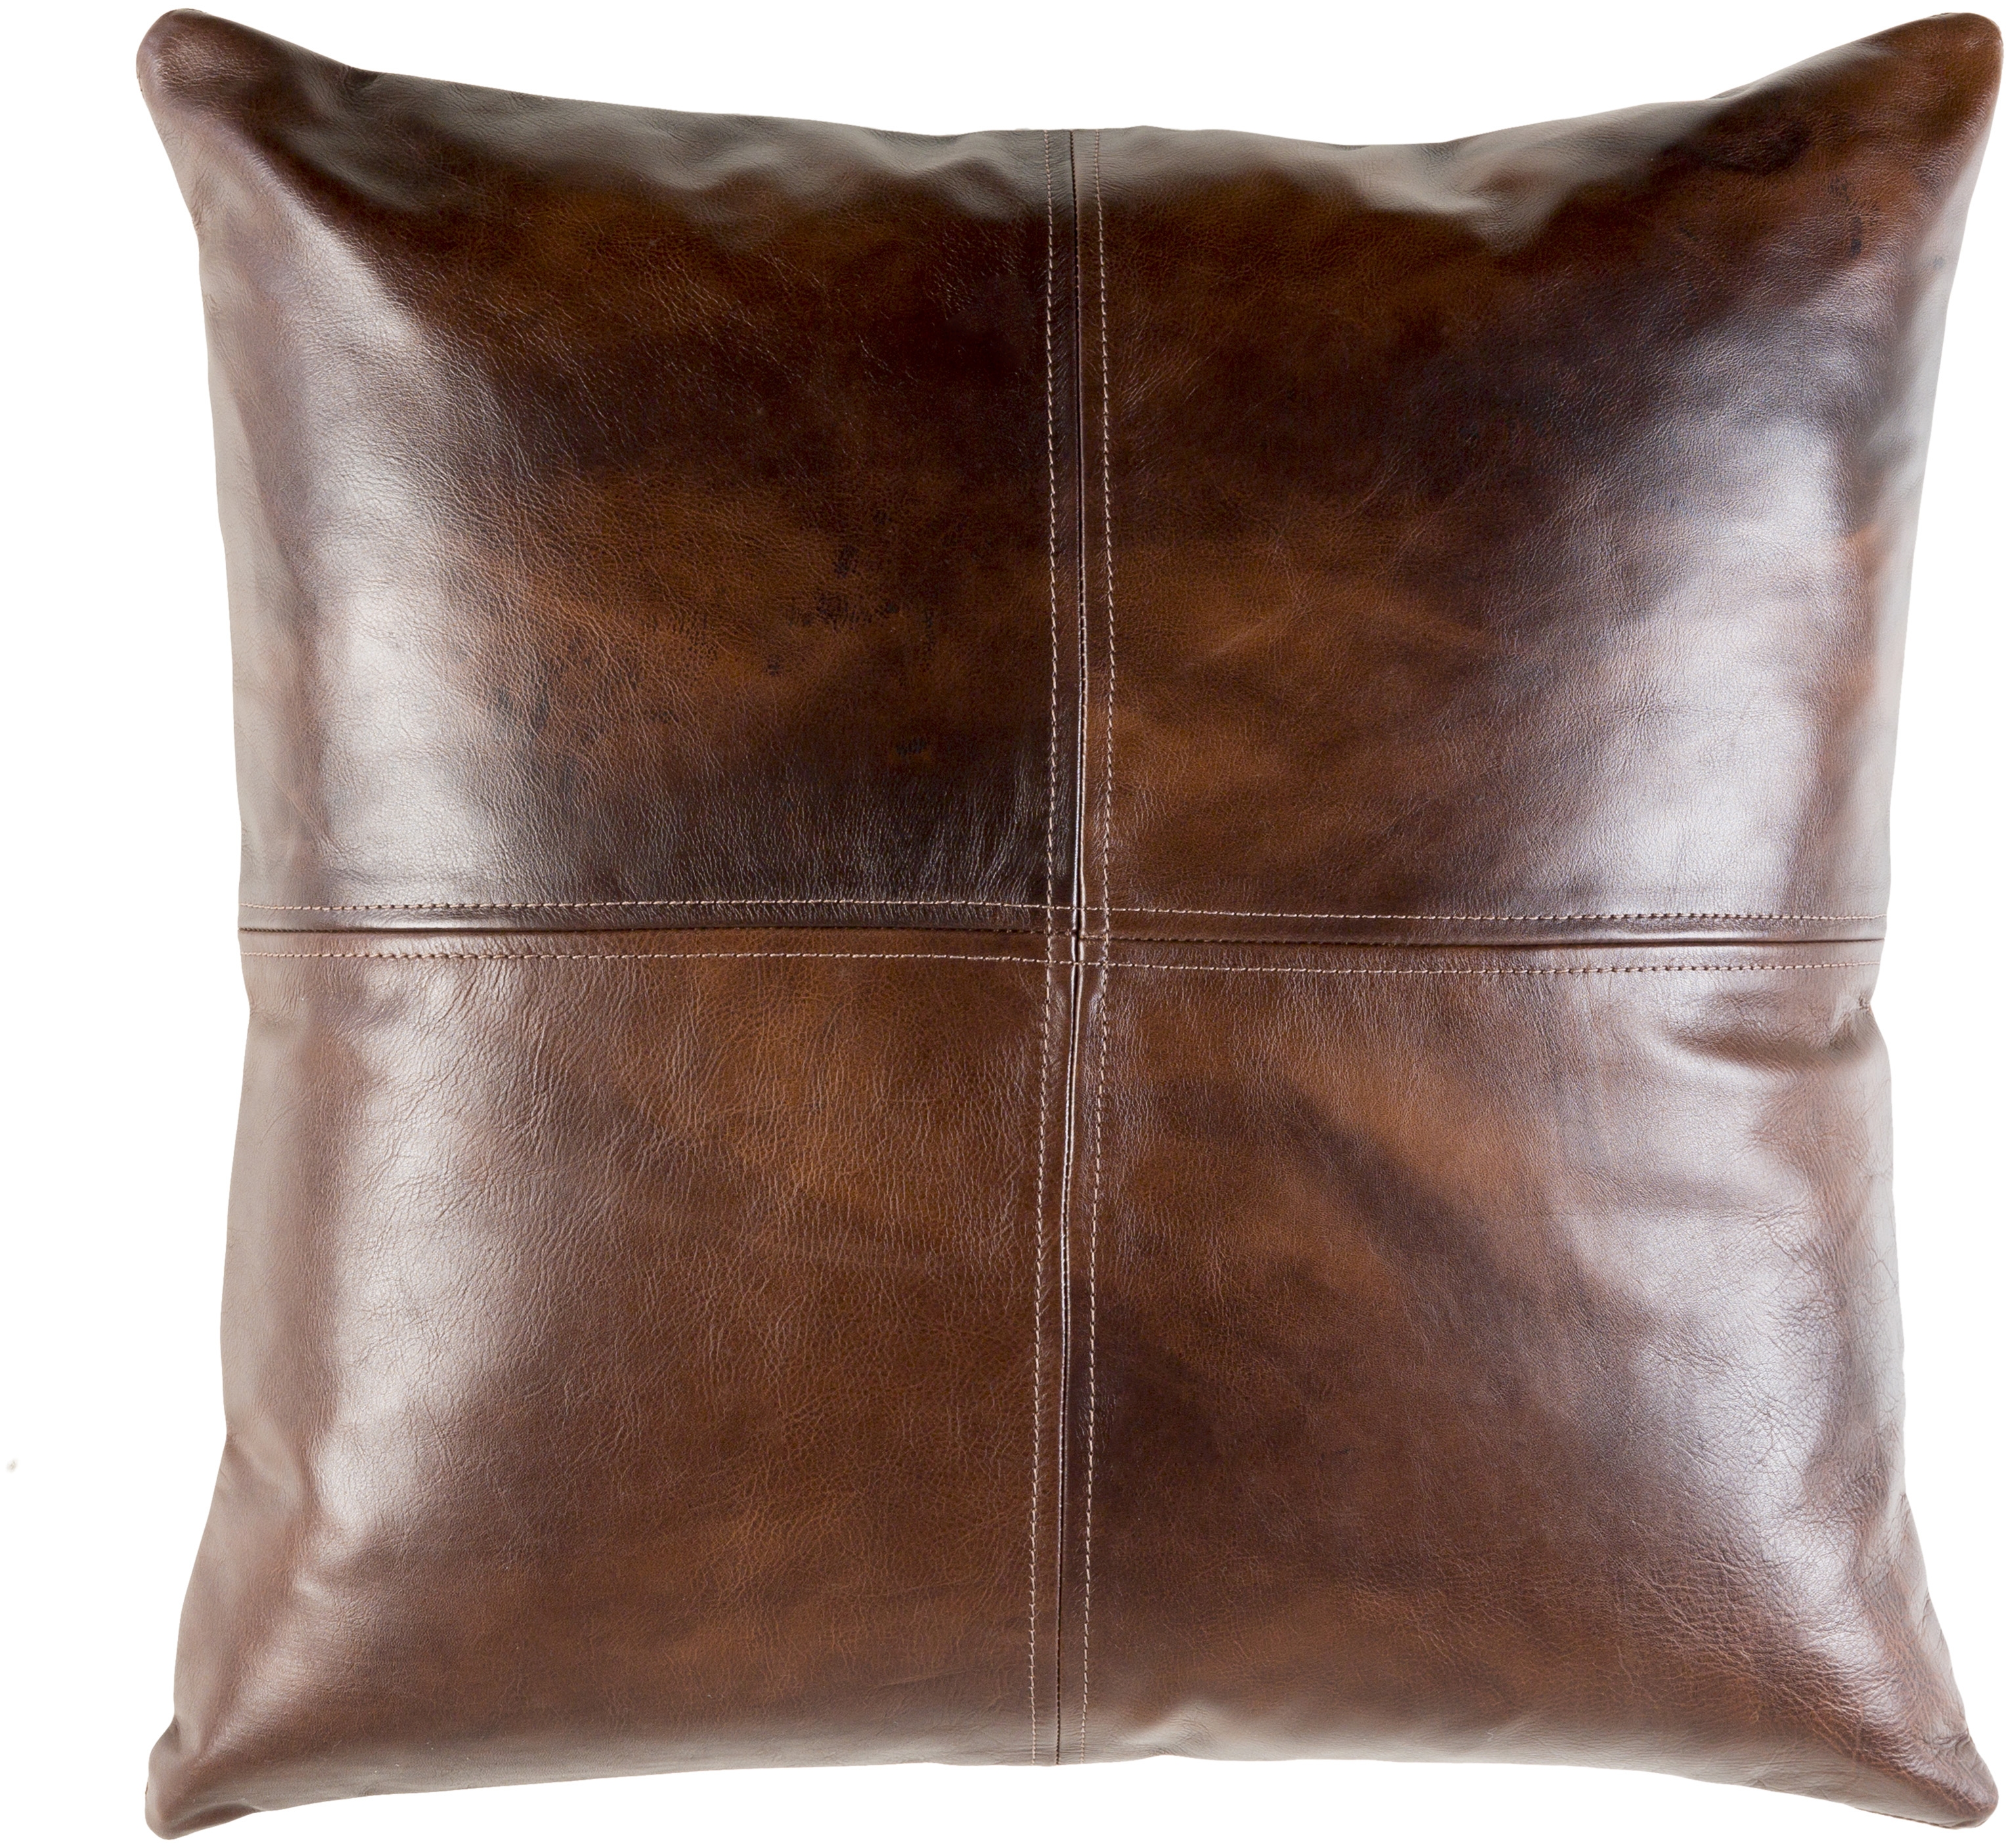 Sheffield Throw Pillow, 20" x 20", with down insert - Image 0